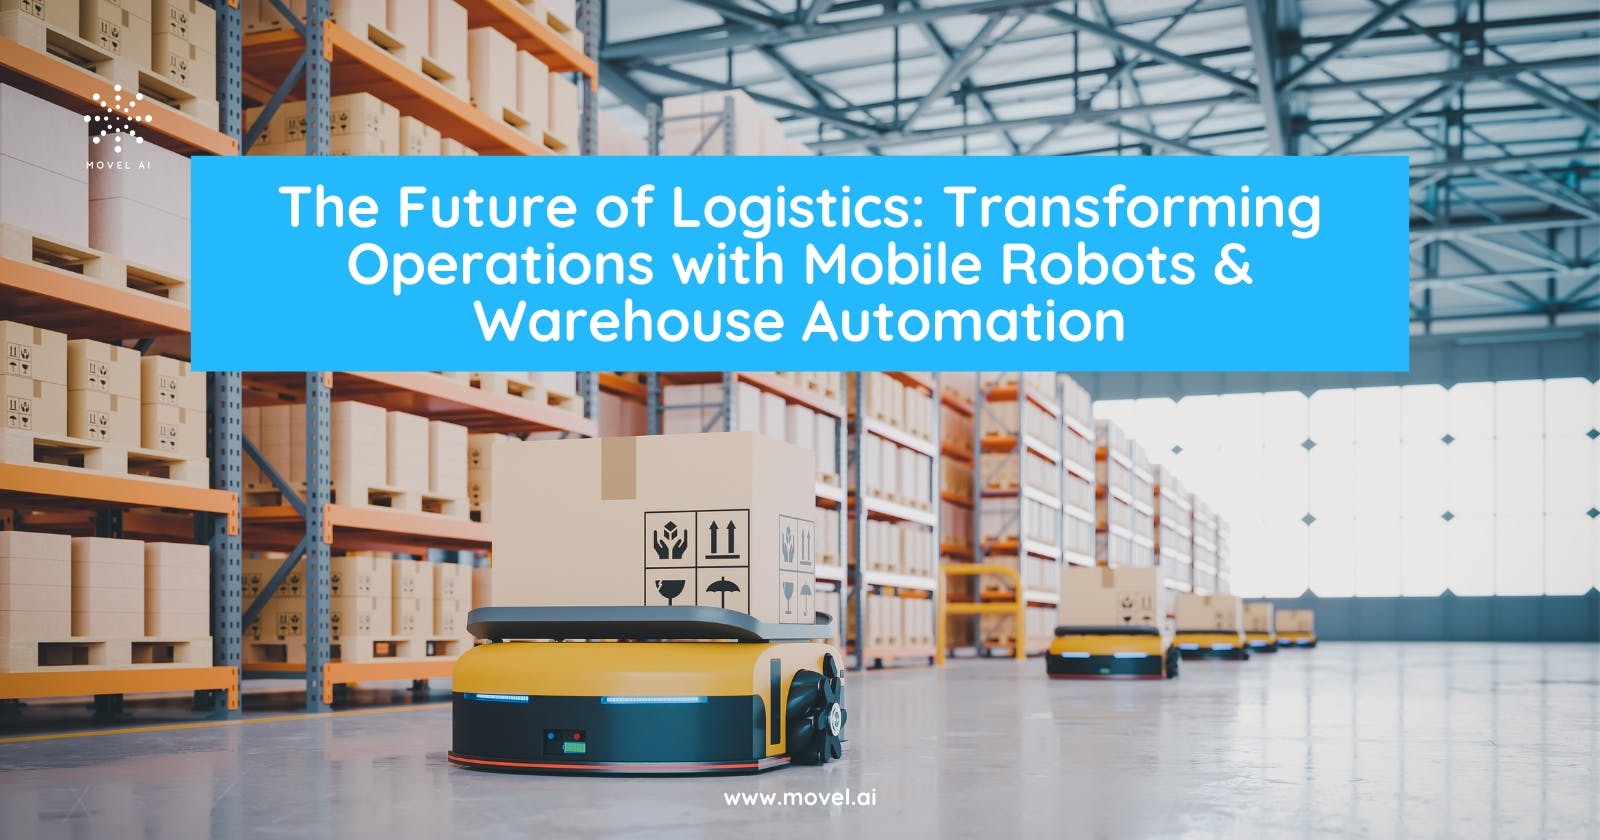 The Future of Logistics: Transforming Operations with Mobile Robots & Warehouse Automation